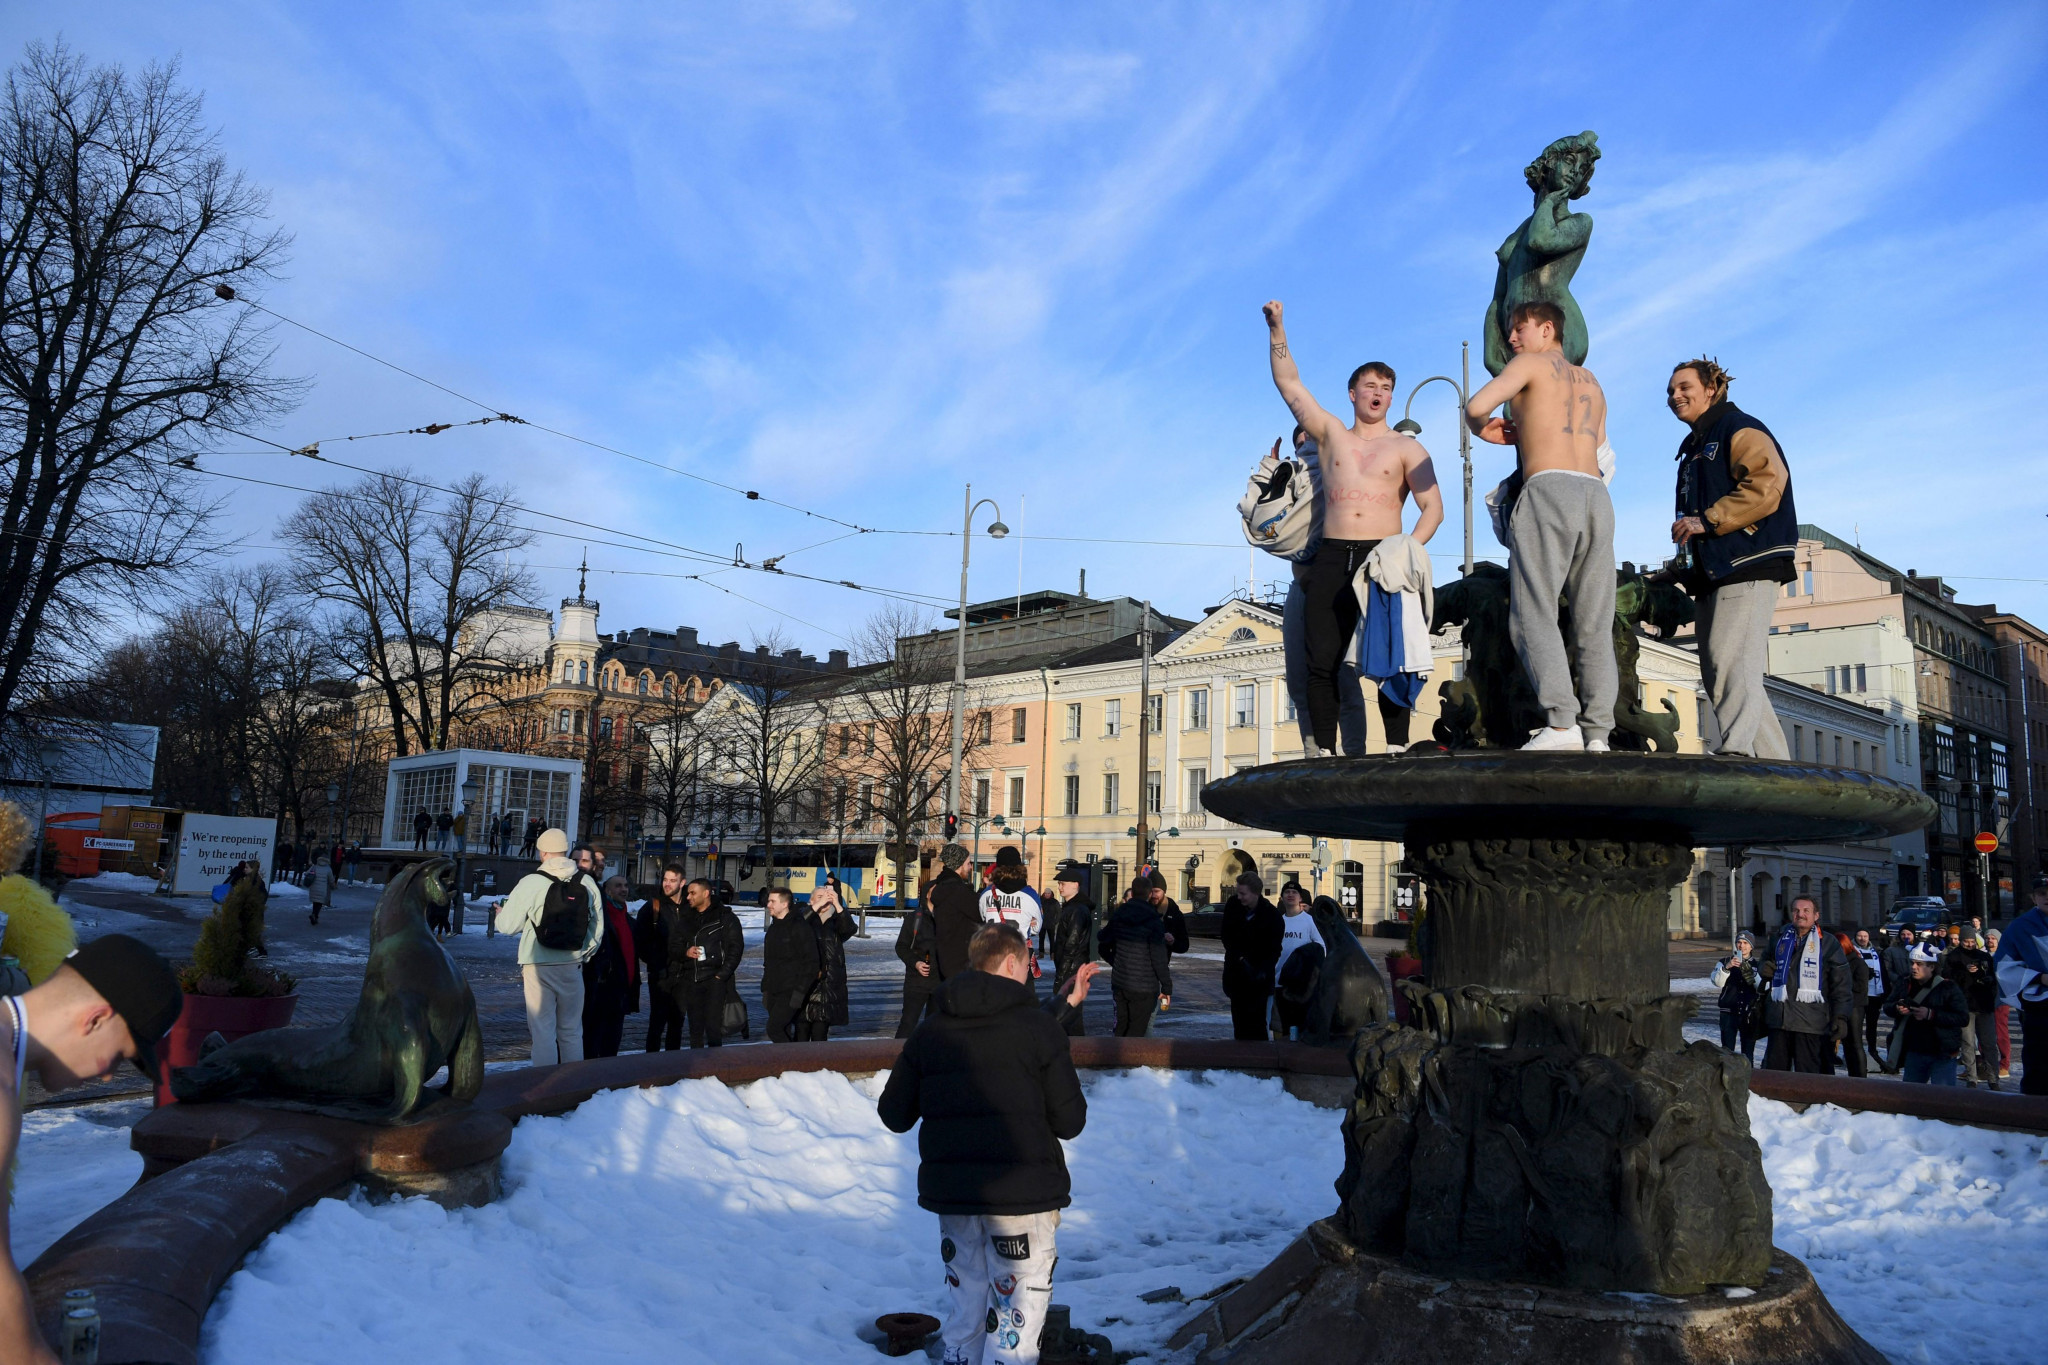 Finland ice hockey fans celebrate historic win while Fasel draws criticism